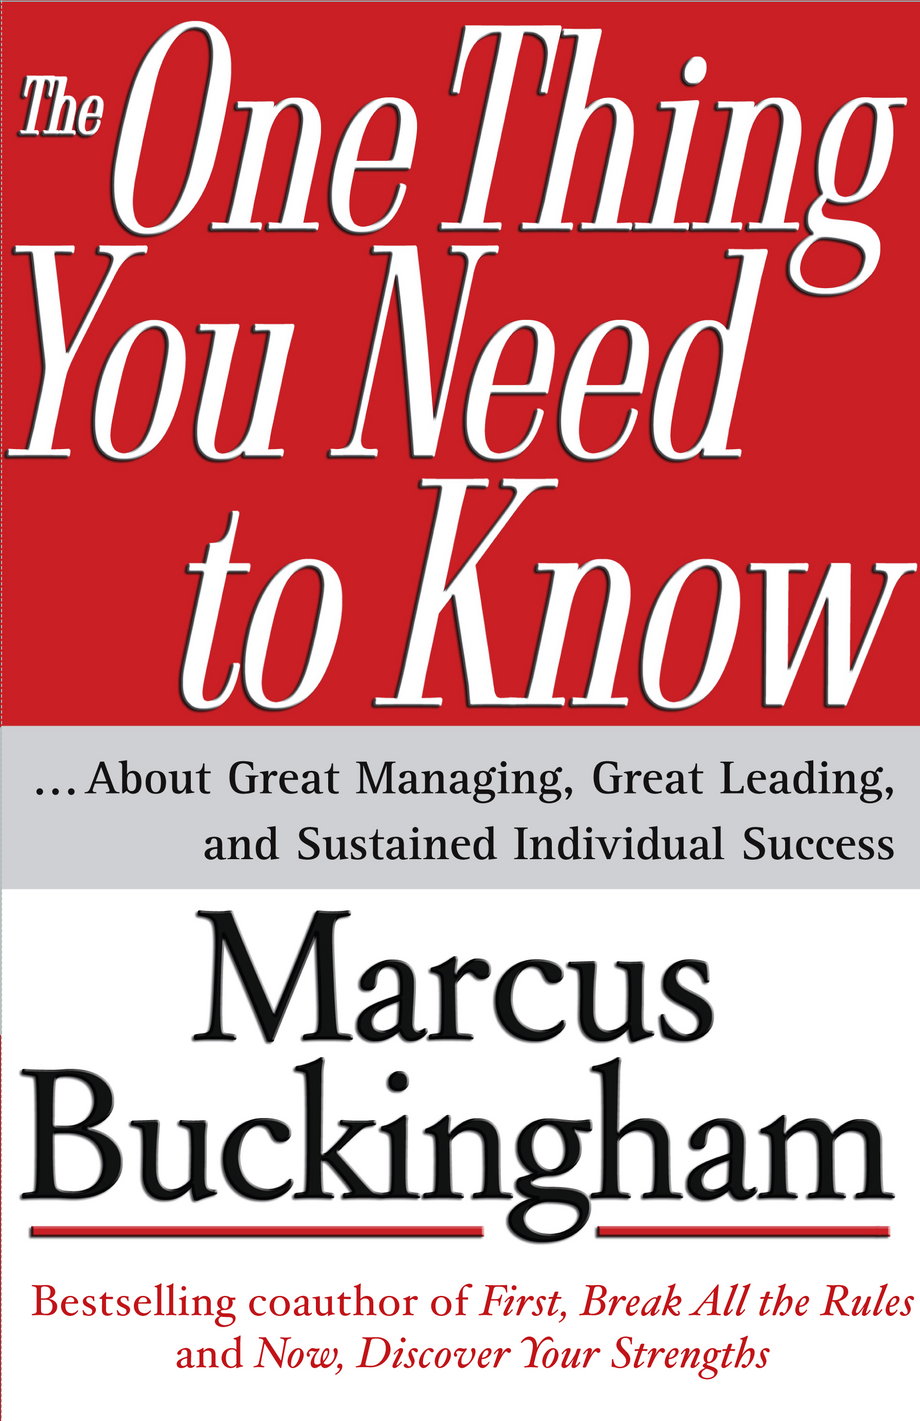 'The One Thing You Need To Know' by Marcus Buckingham